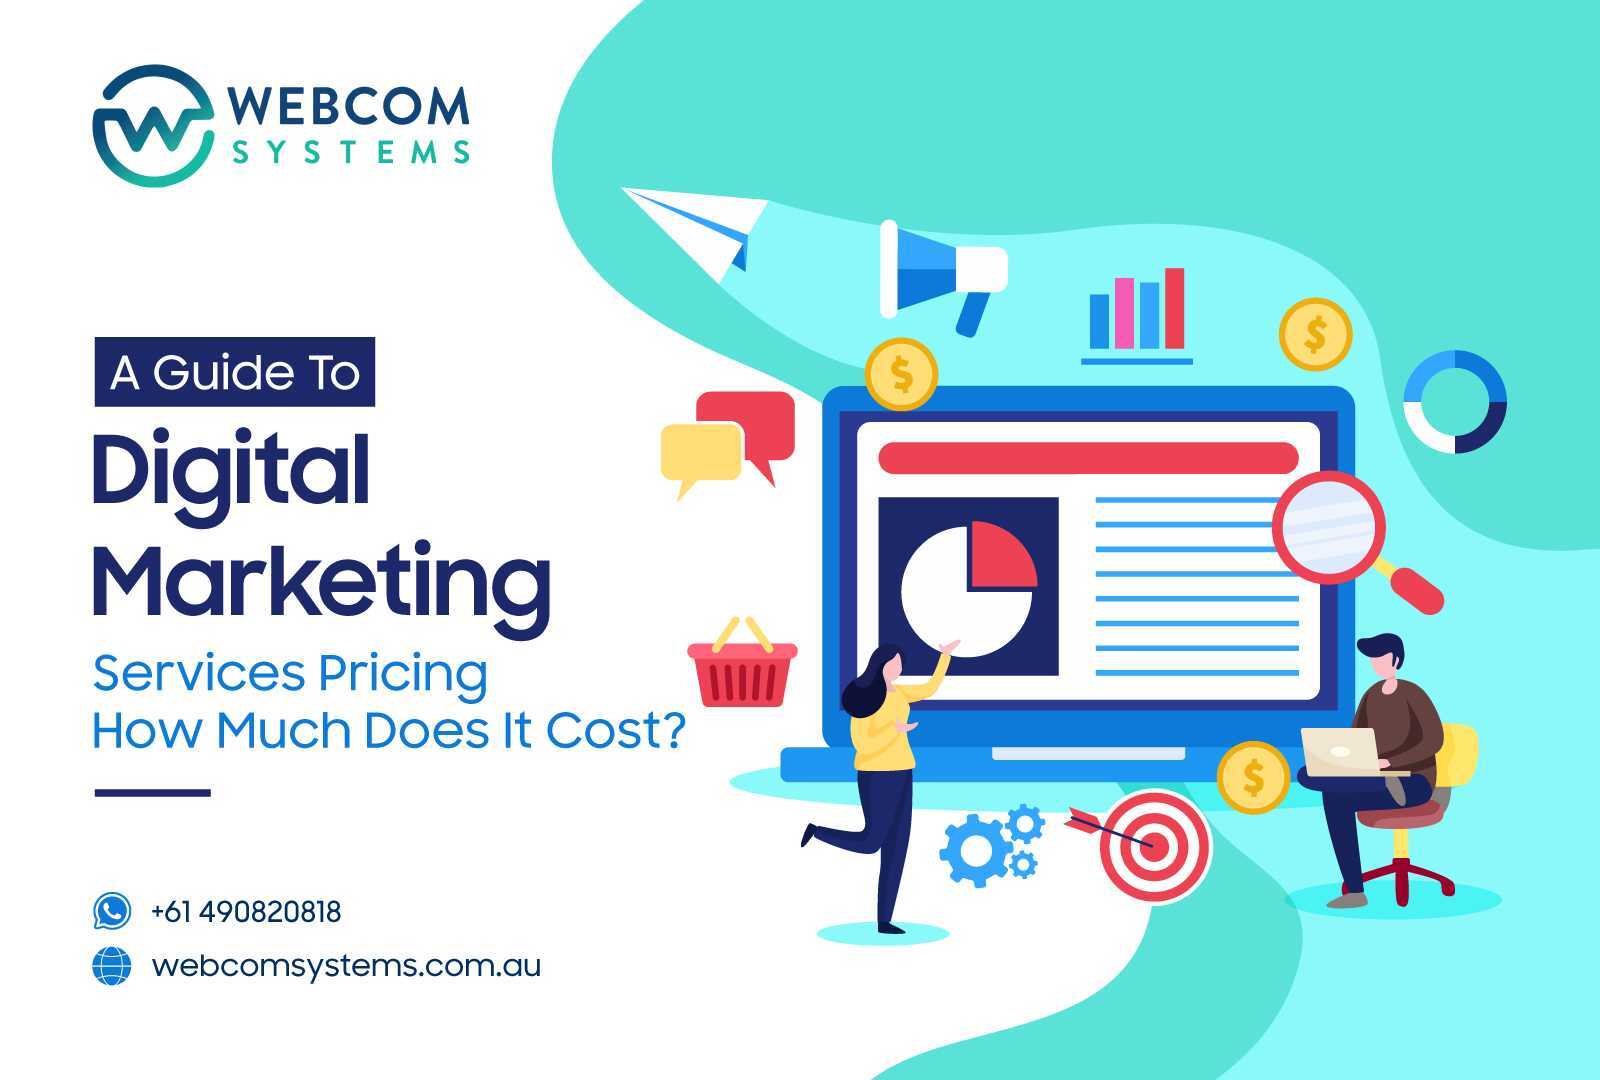 A Guide To Digital Marketing Services Pricing- How Much Does It Cost